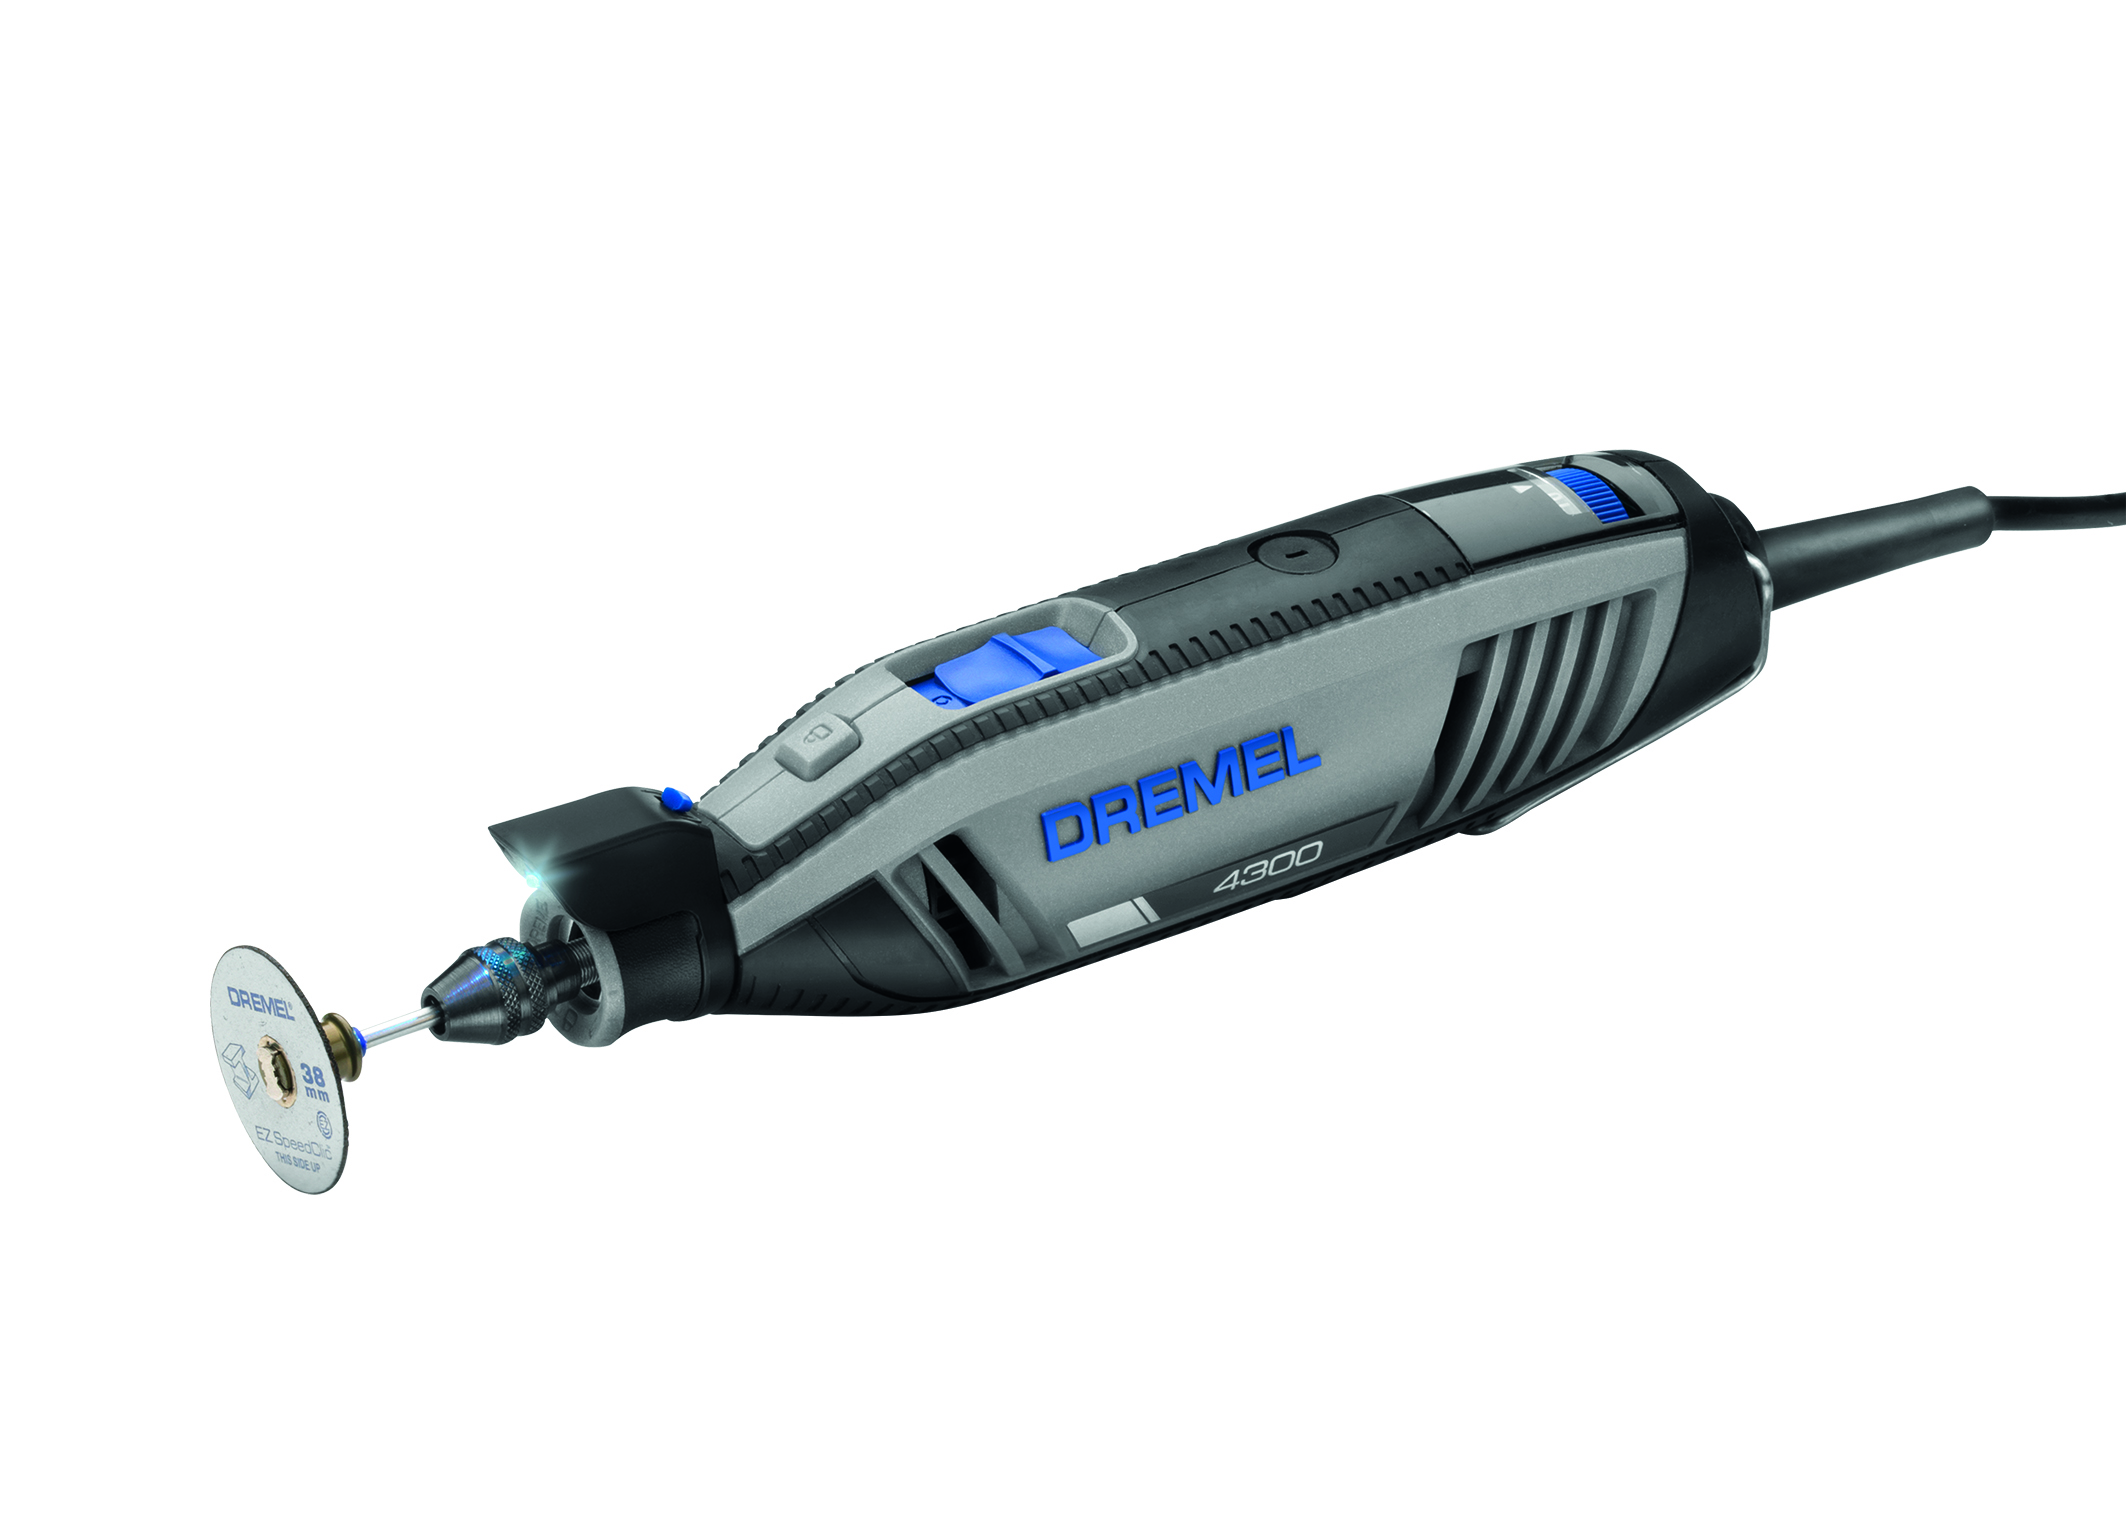 With multi chuck attachment to change accessories easily:  the Dremel 4300 multitool 